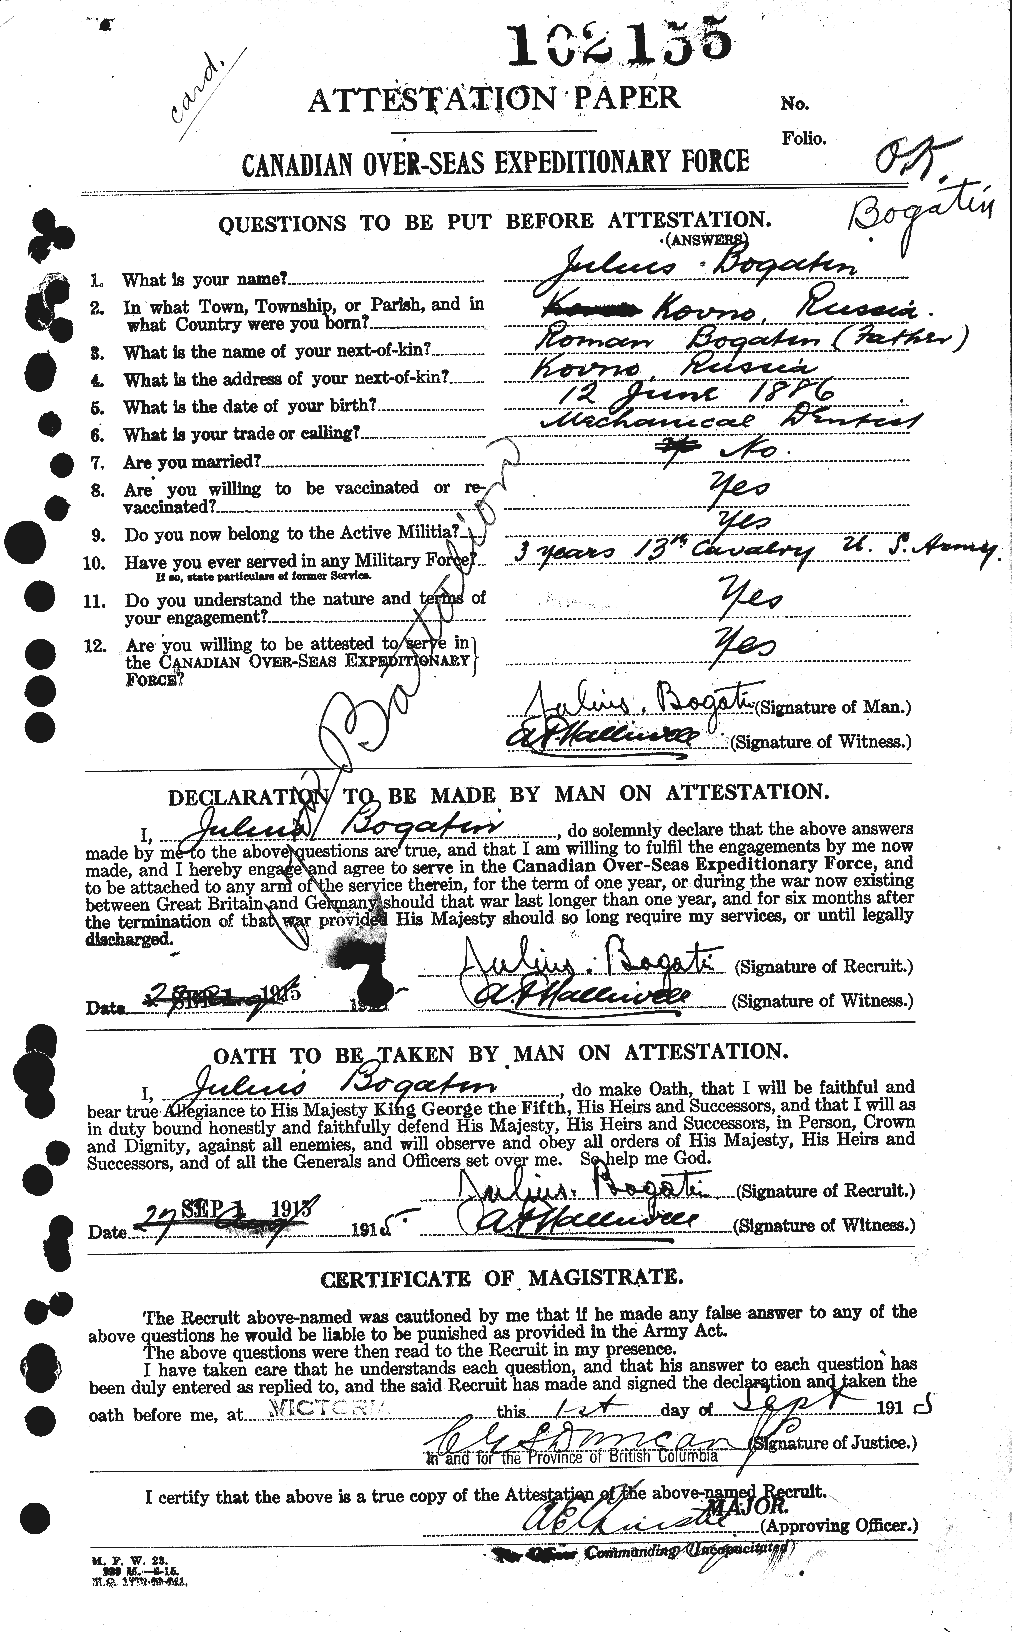 Personnel Records of the First World War - CEF 249215a